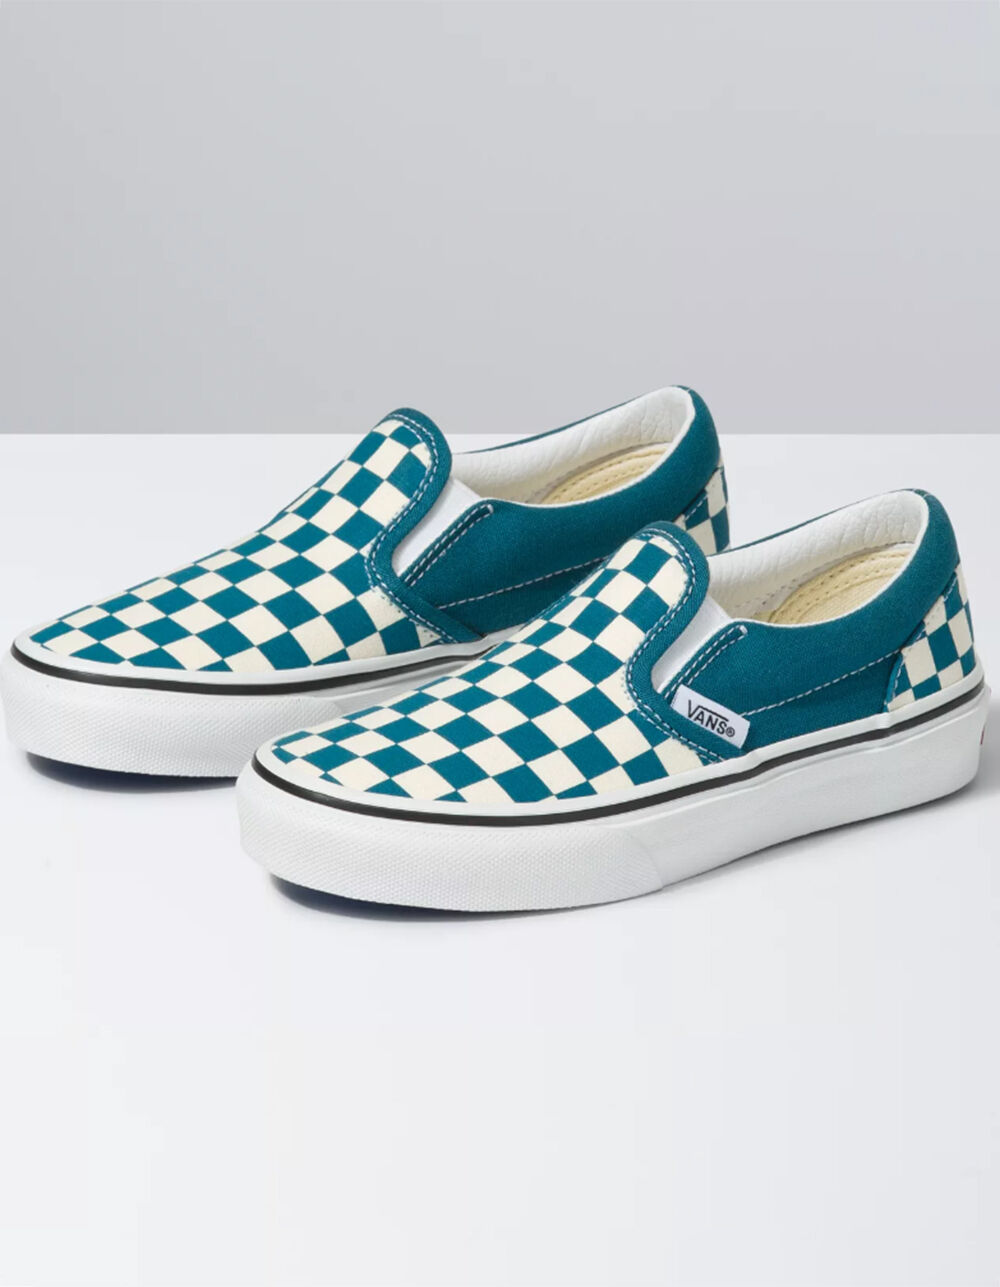 VANS Checkerboard Classic Juniors Slip On Shoes - CHECK | Tillys